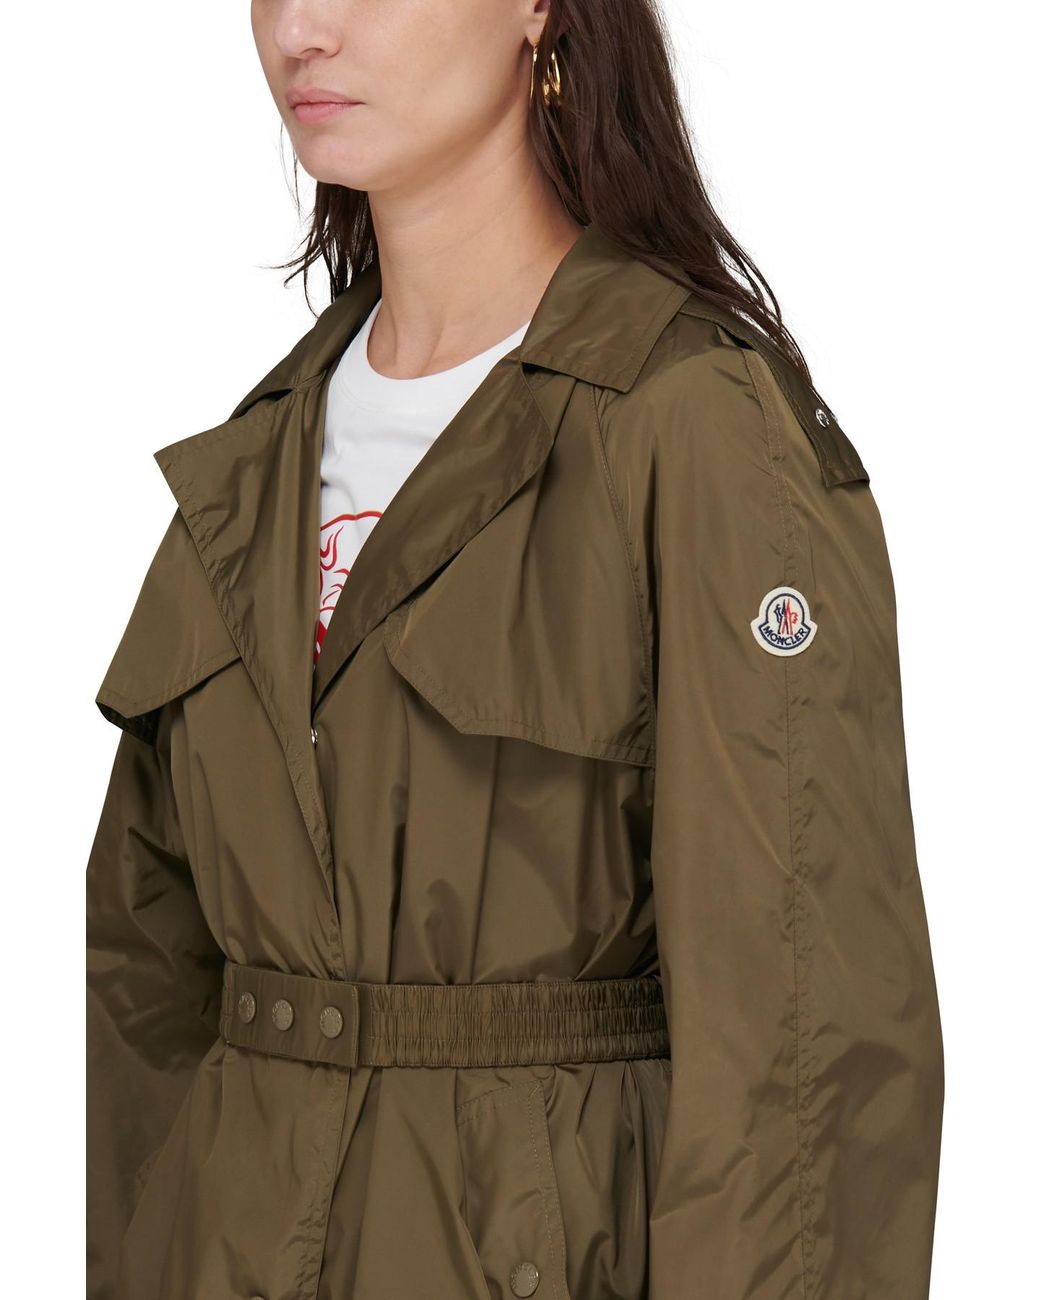 Moncler Synthetic Tamarissiere Trench Coat in Olive (Green) | Lyst Canada